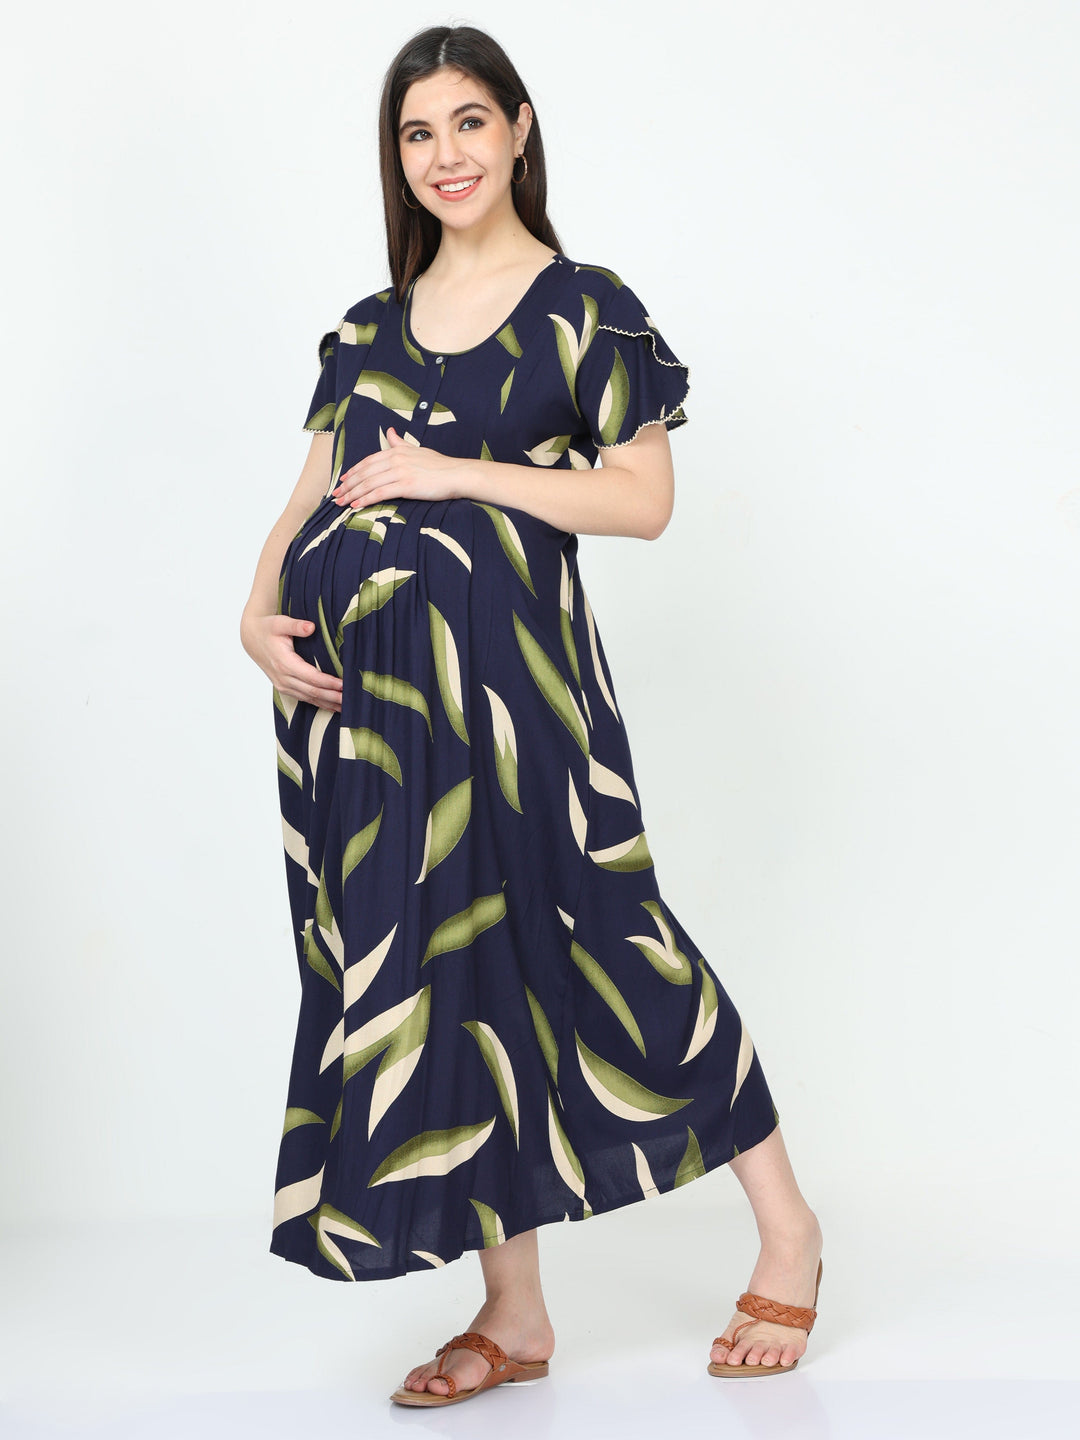  Maternity Dress  Blue And Green Nighty - Maternity Nighties Online India- 9shines label 